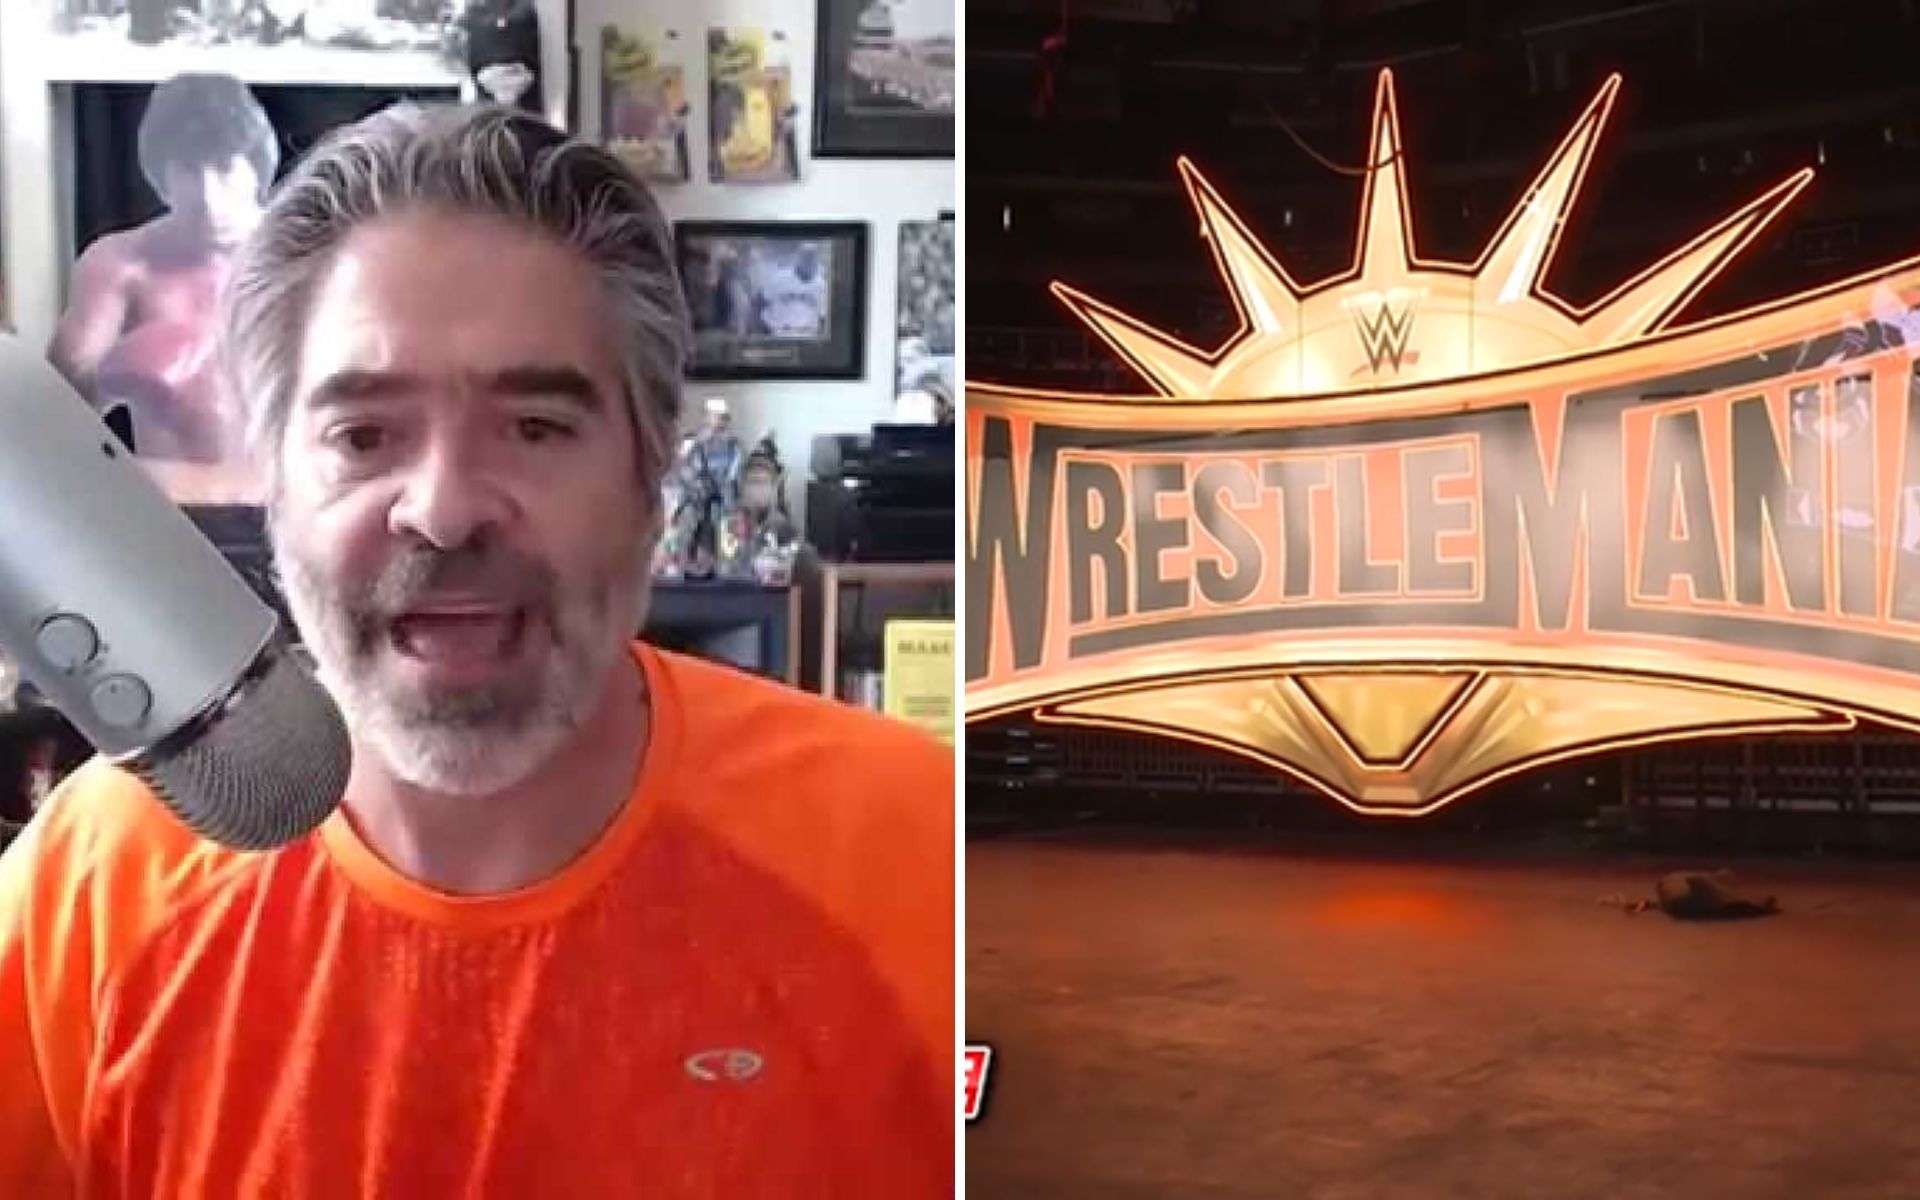 The former WWE writer thinks WWE is going to drop the ball with the 36-year-old star